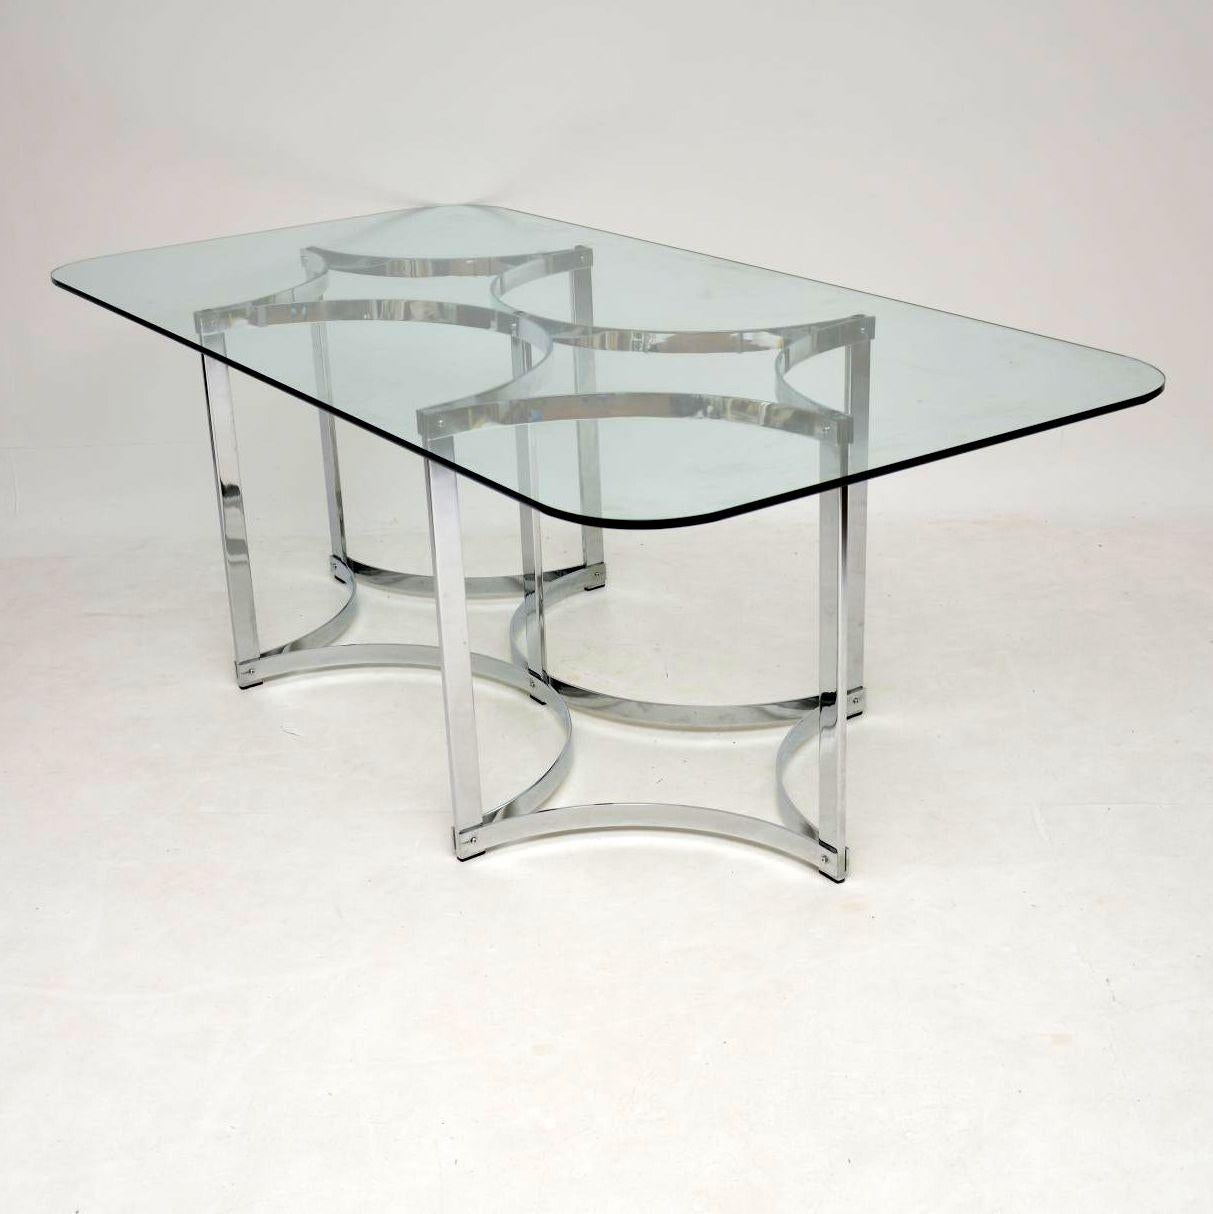 Late 20th Century Vintage Merrow Associates Dining Table in Chrome & Glass, 1970s